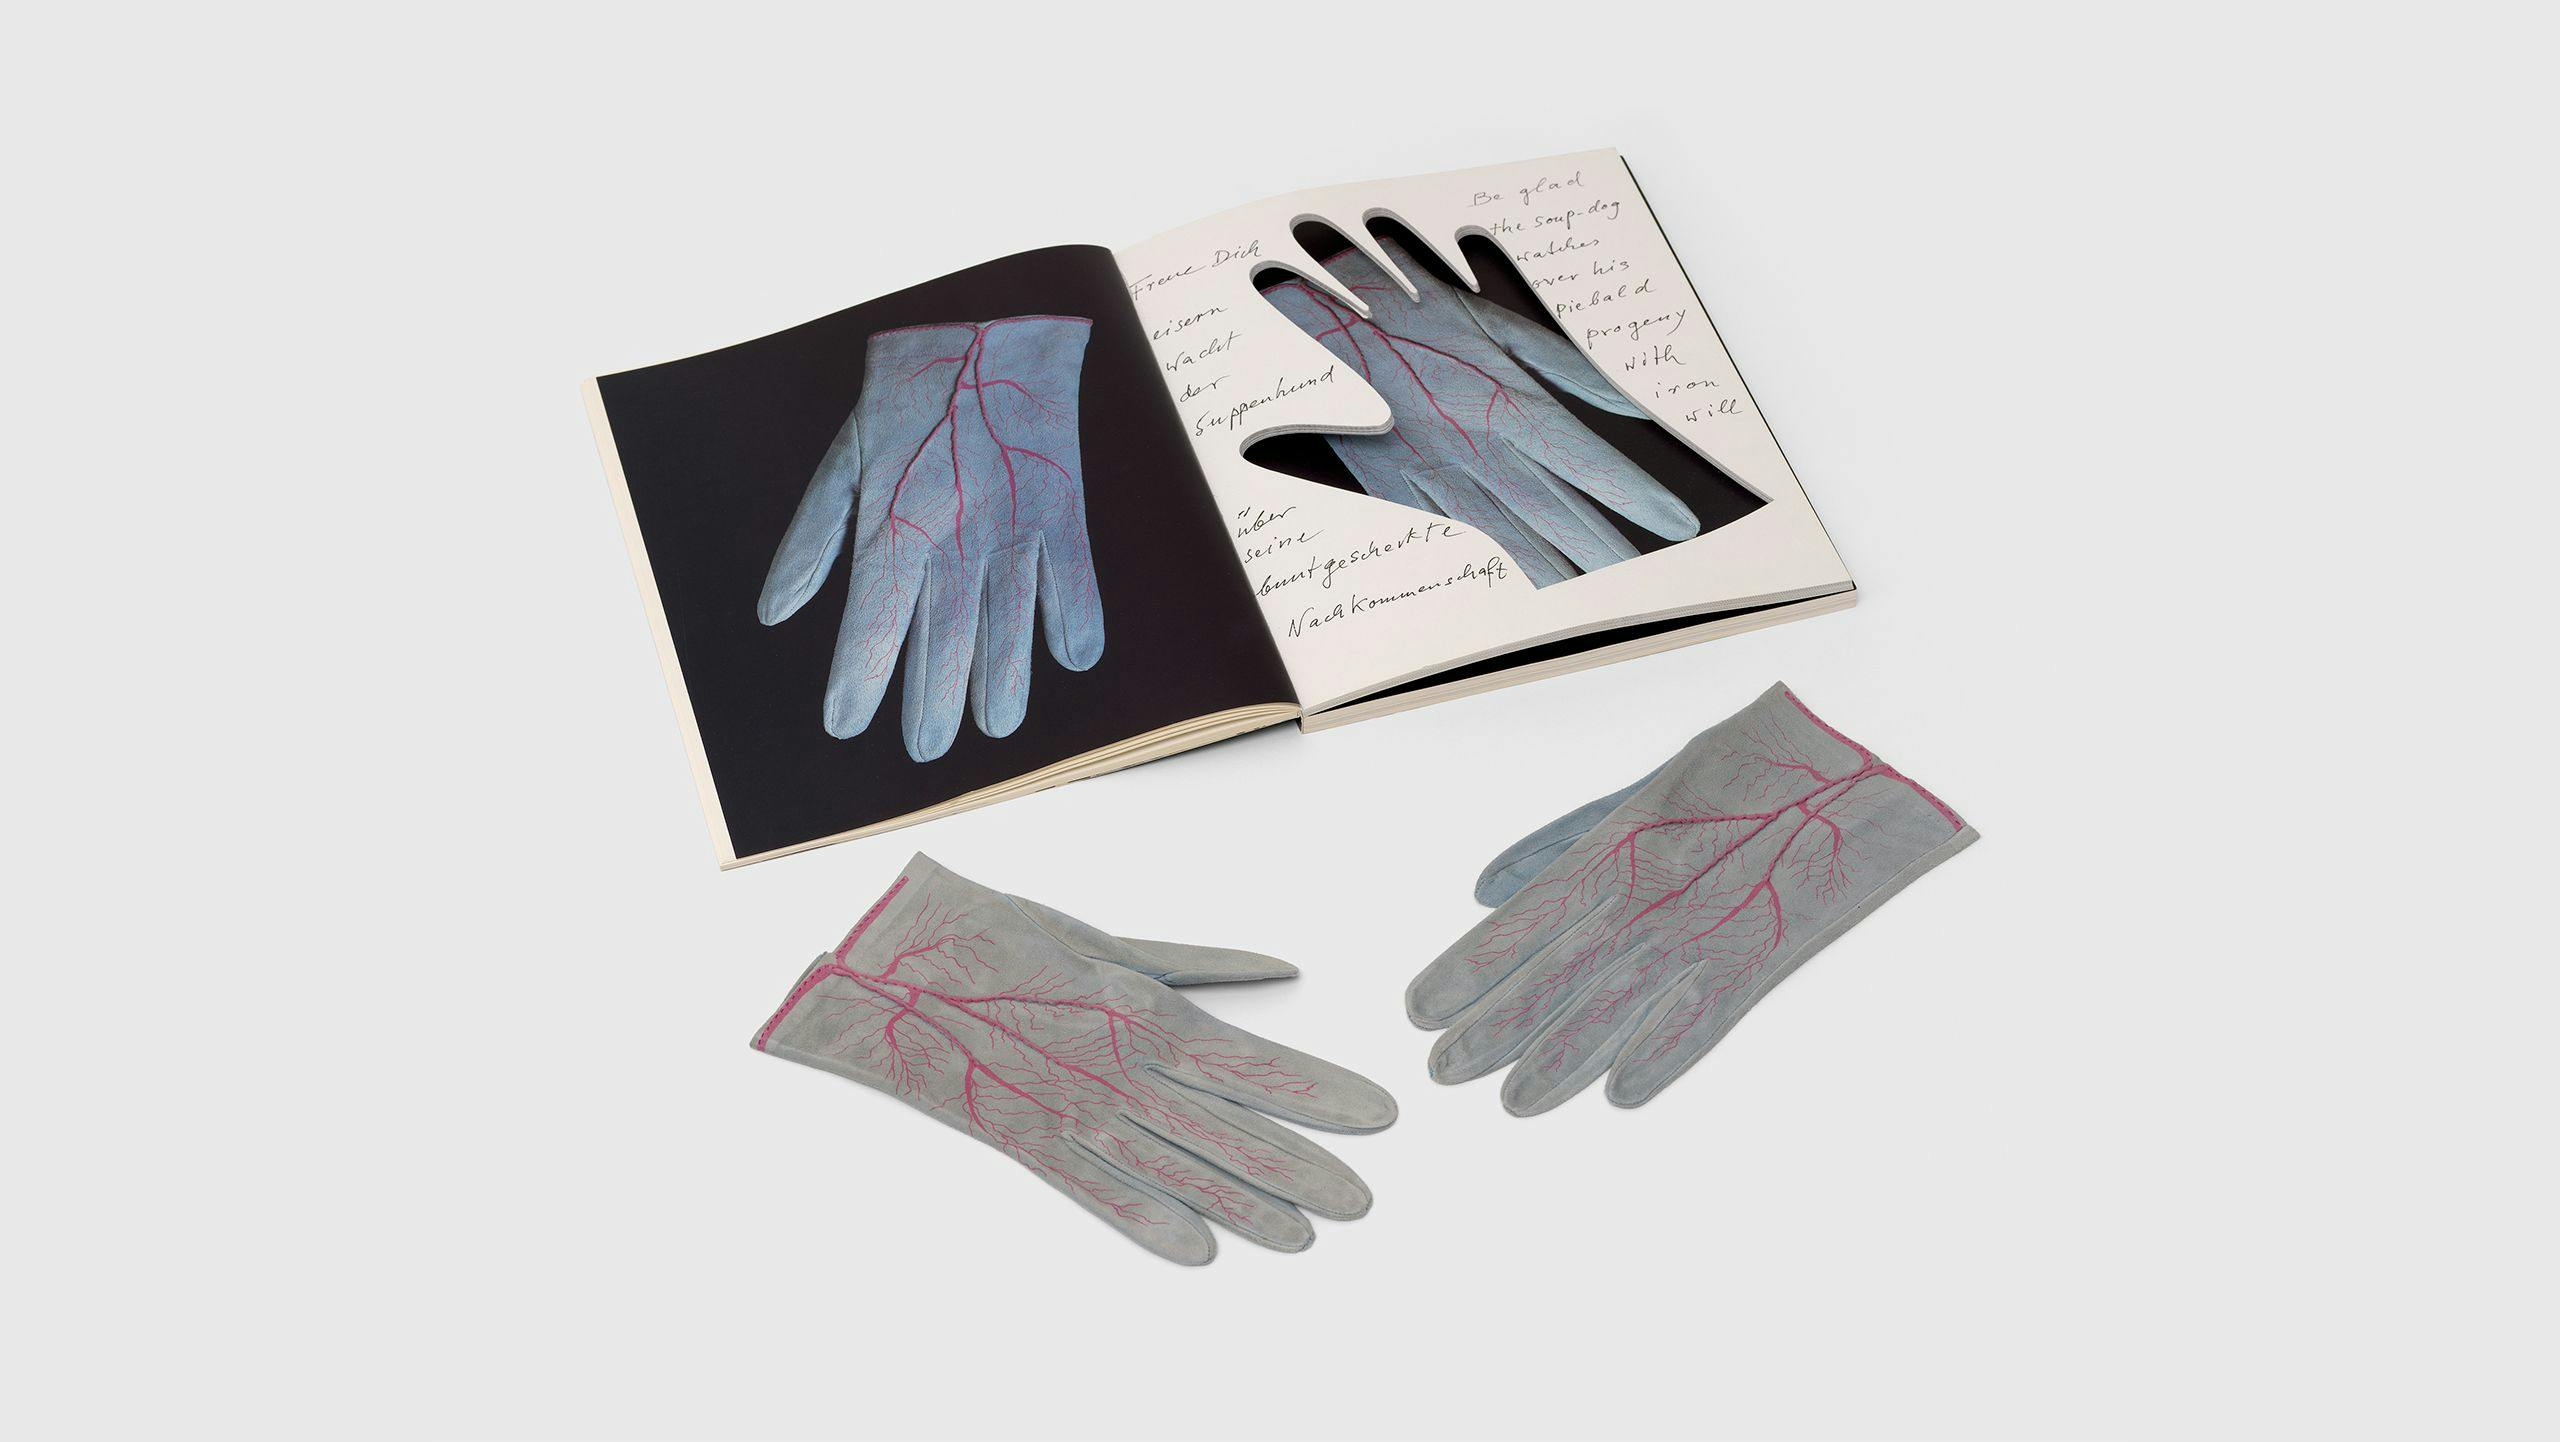 An artwork by Meret Oppenheim, titled Glove, dated 1985